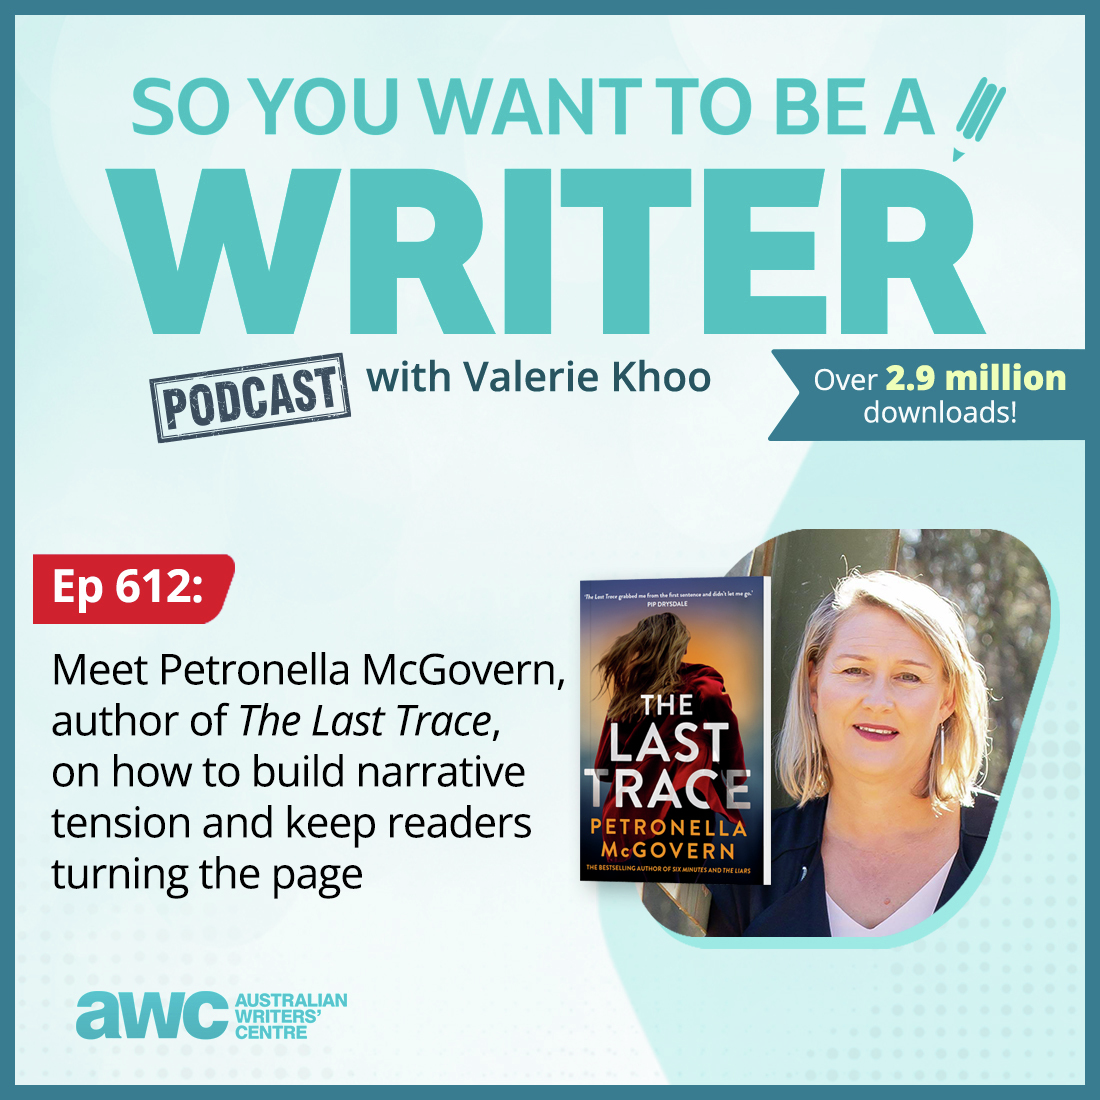 WRITER 612: Meet Petronella McGovern, author of 'The Last Trace', on how to build narrative tension and keep readers turning the page.